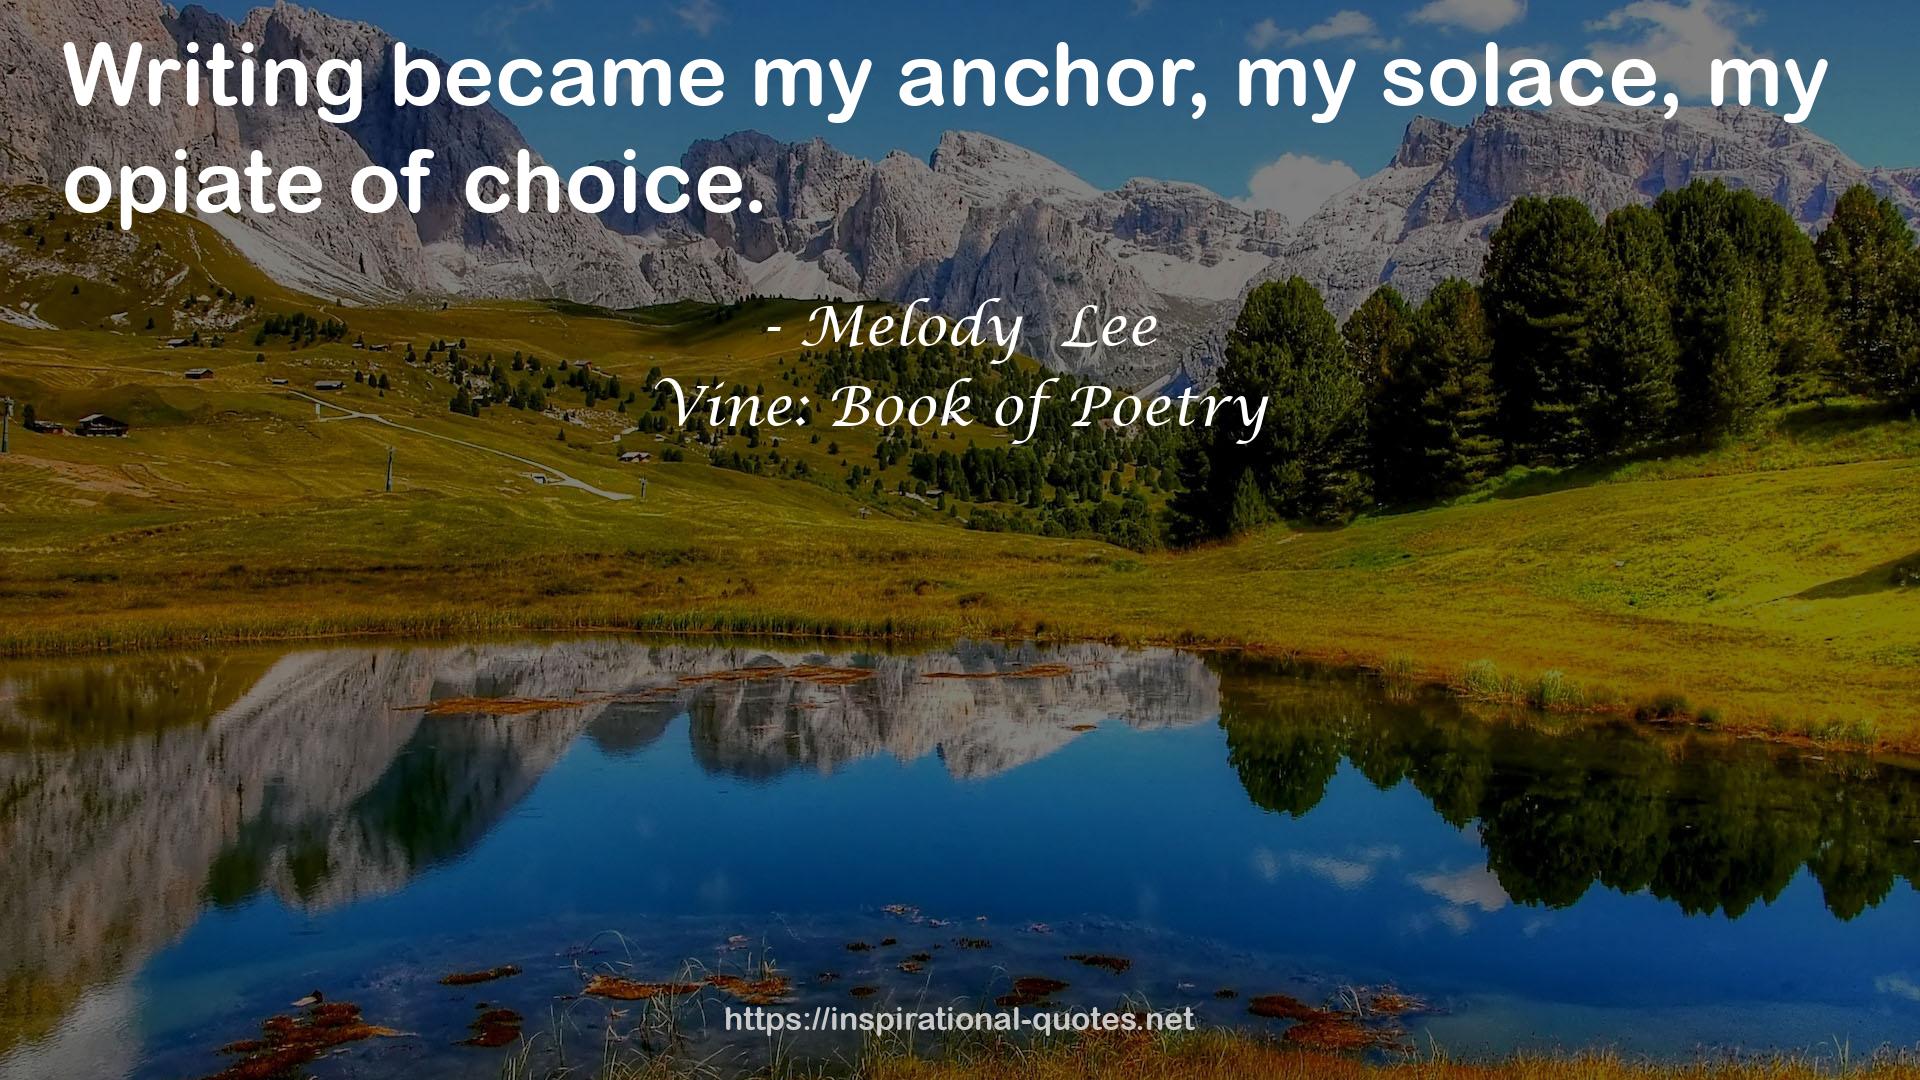 Vine: Book of Poetry QUOTES